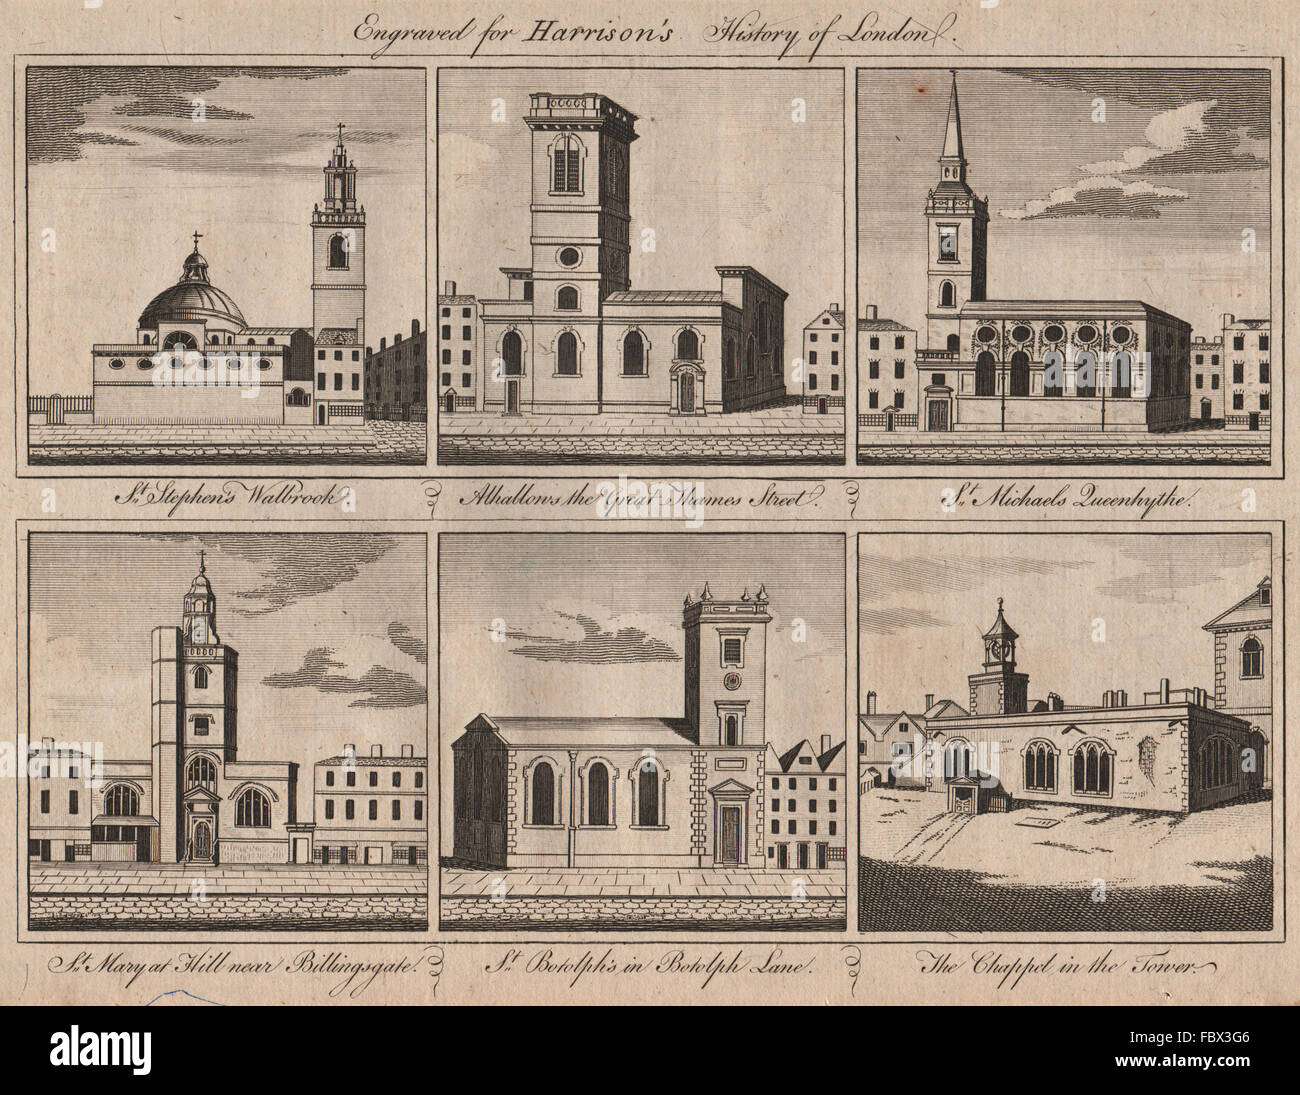 Città chiese di St Stephen Walbrook. St Michael Queenhithe. St Mary a Hill, 1775 Foto Stock